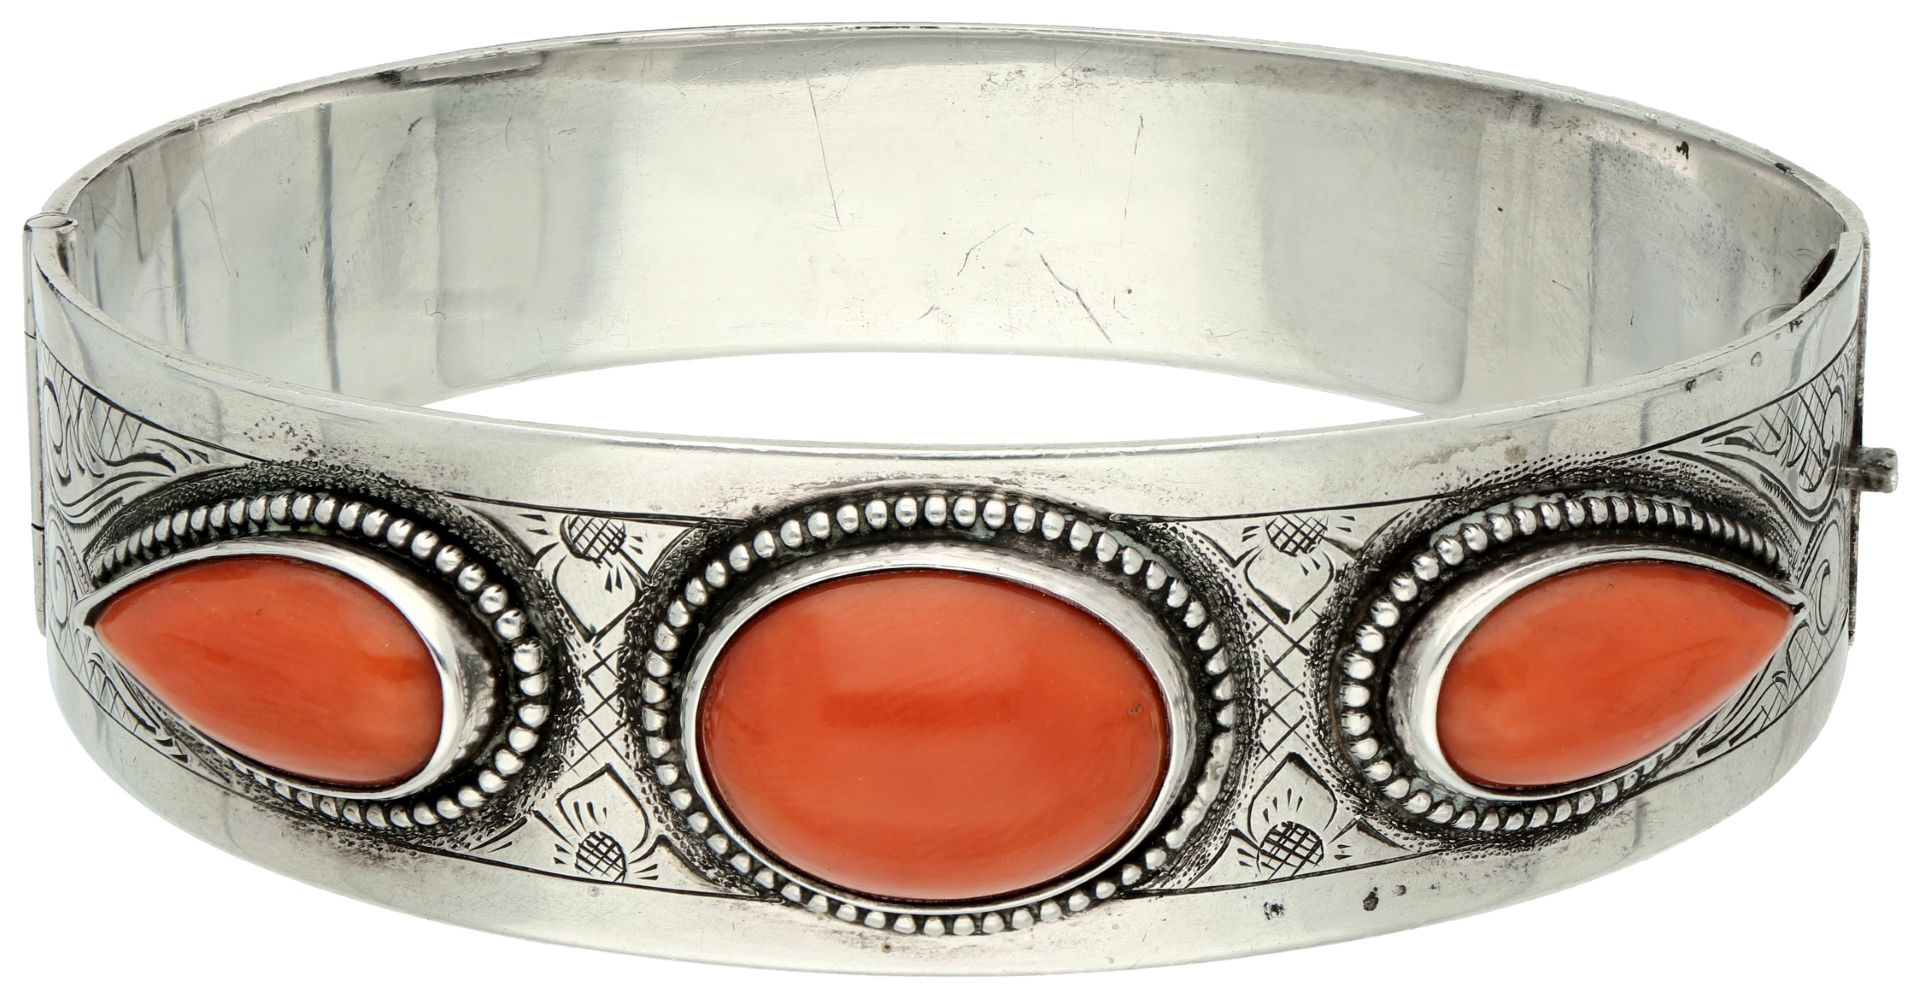 No Reserve - Silver bangle bracelet with red coral.